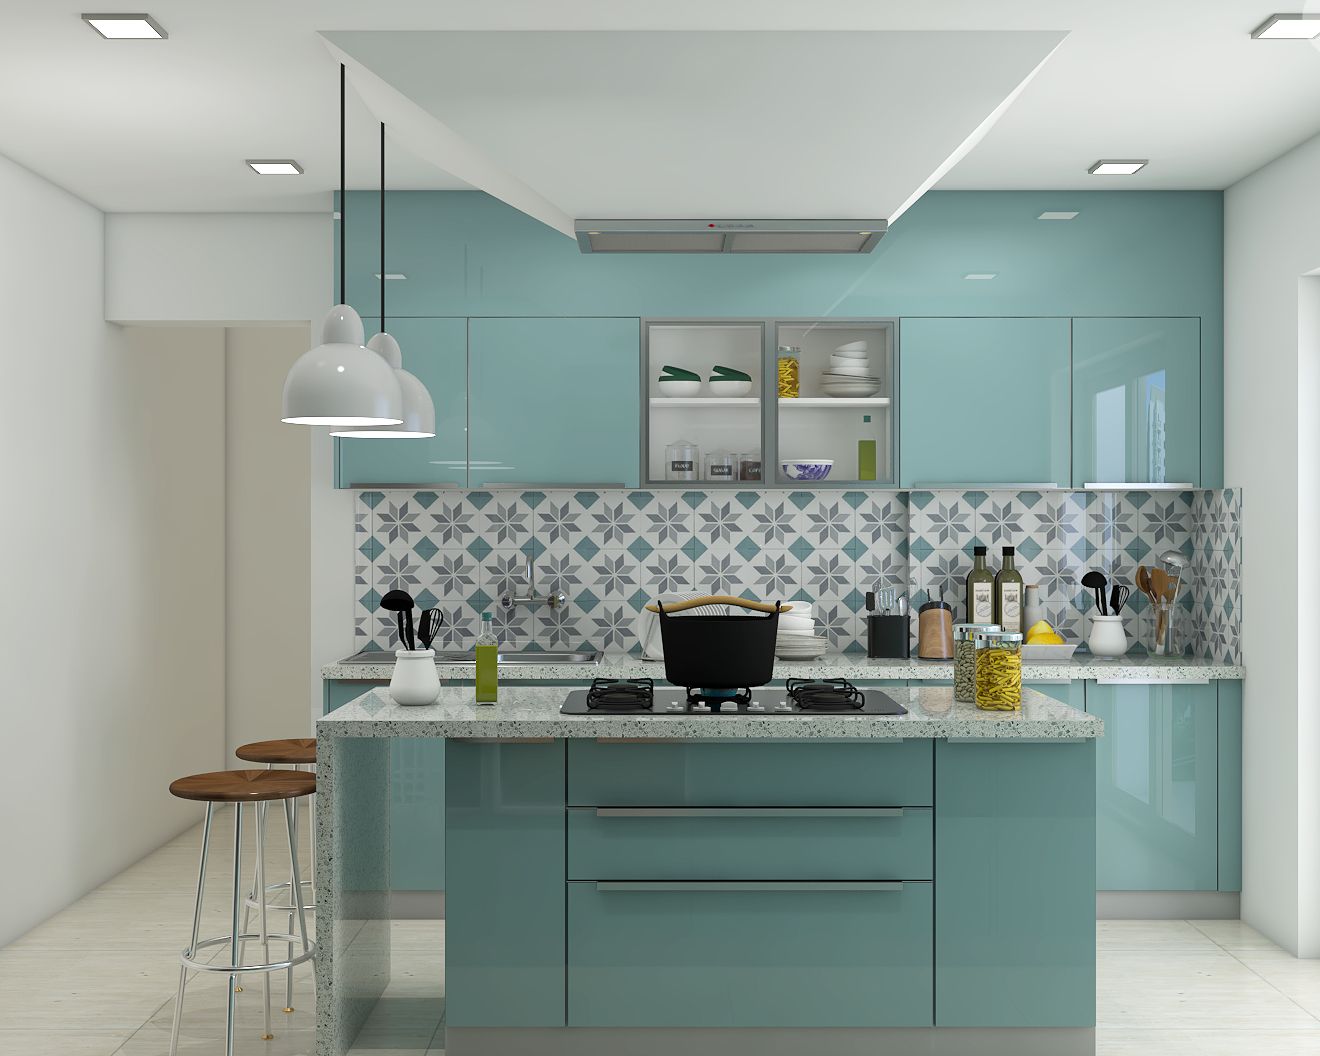 Green Modular Kitchen Design With Glossy Cabinets